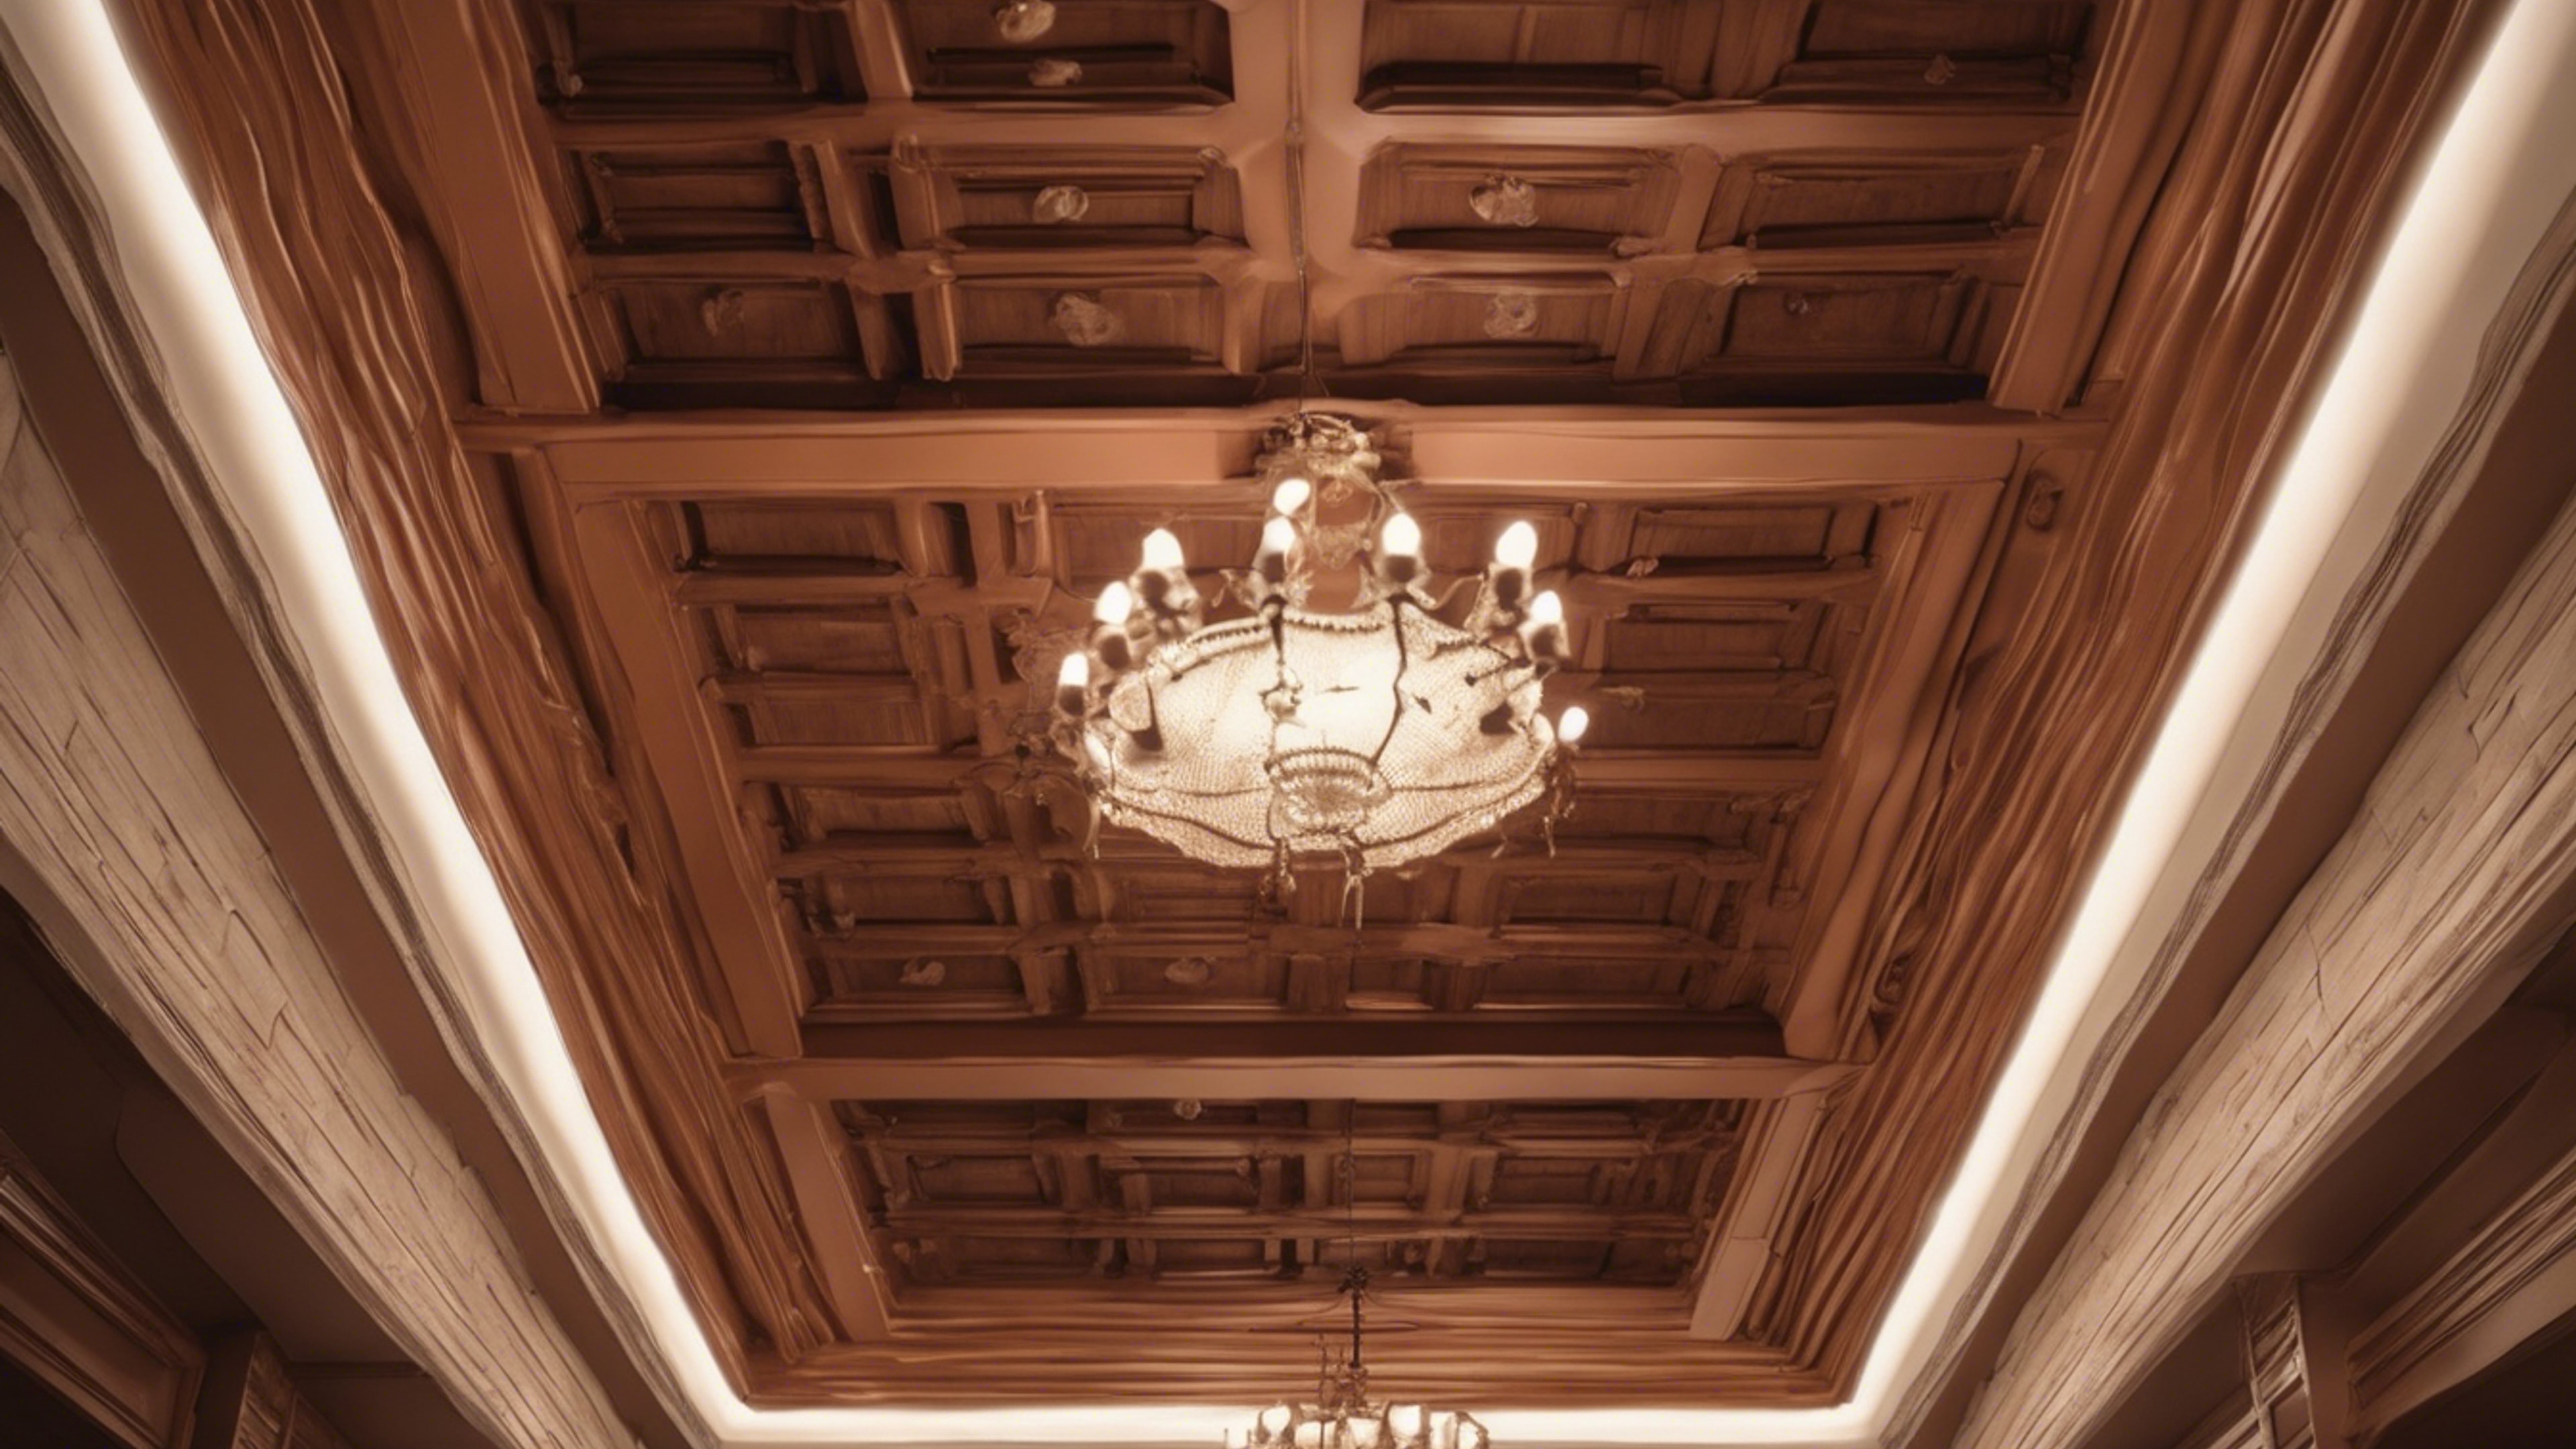 A warm brown coffered ceiling room decorated in traditional style Wallpaper[0b856da927b2485ba9d5]